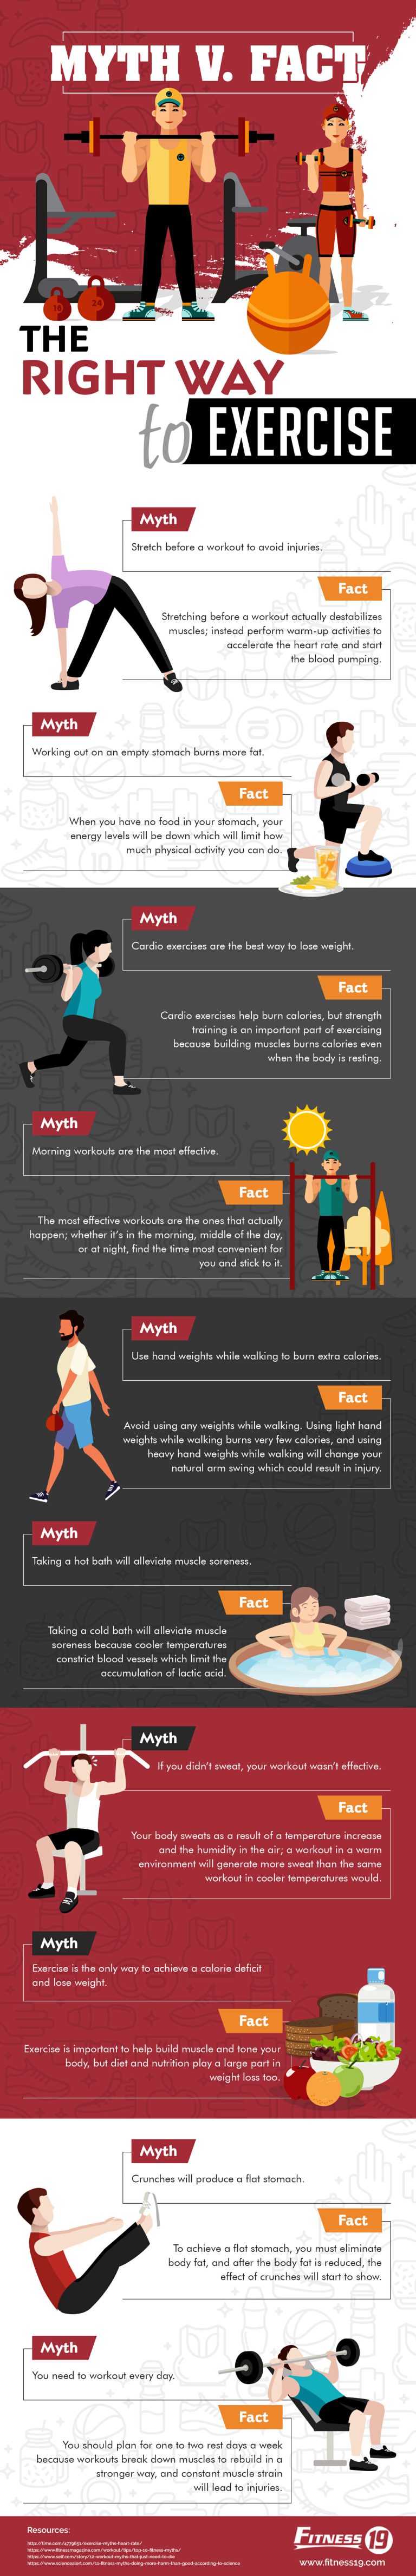 Myth-V-Fact-The-Right-Way-To-Exercise